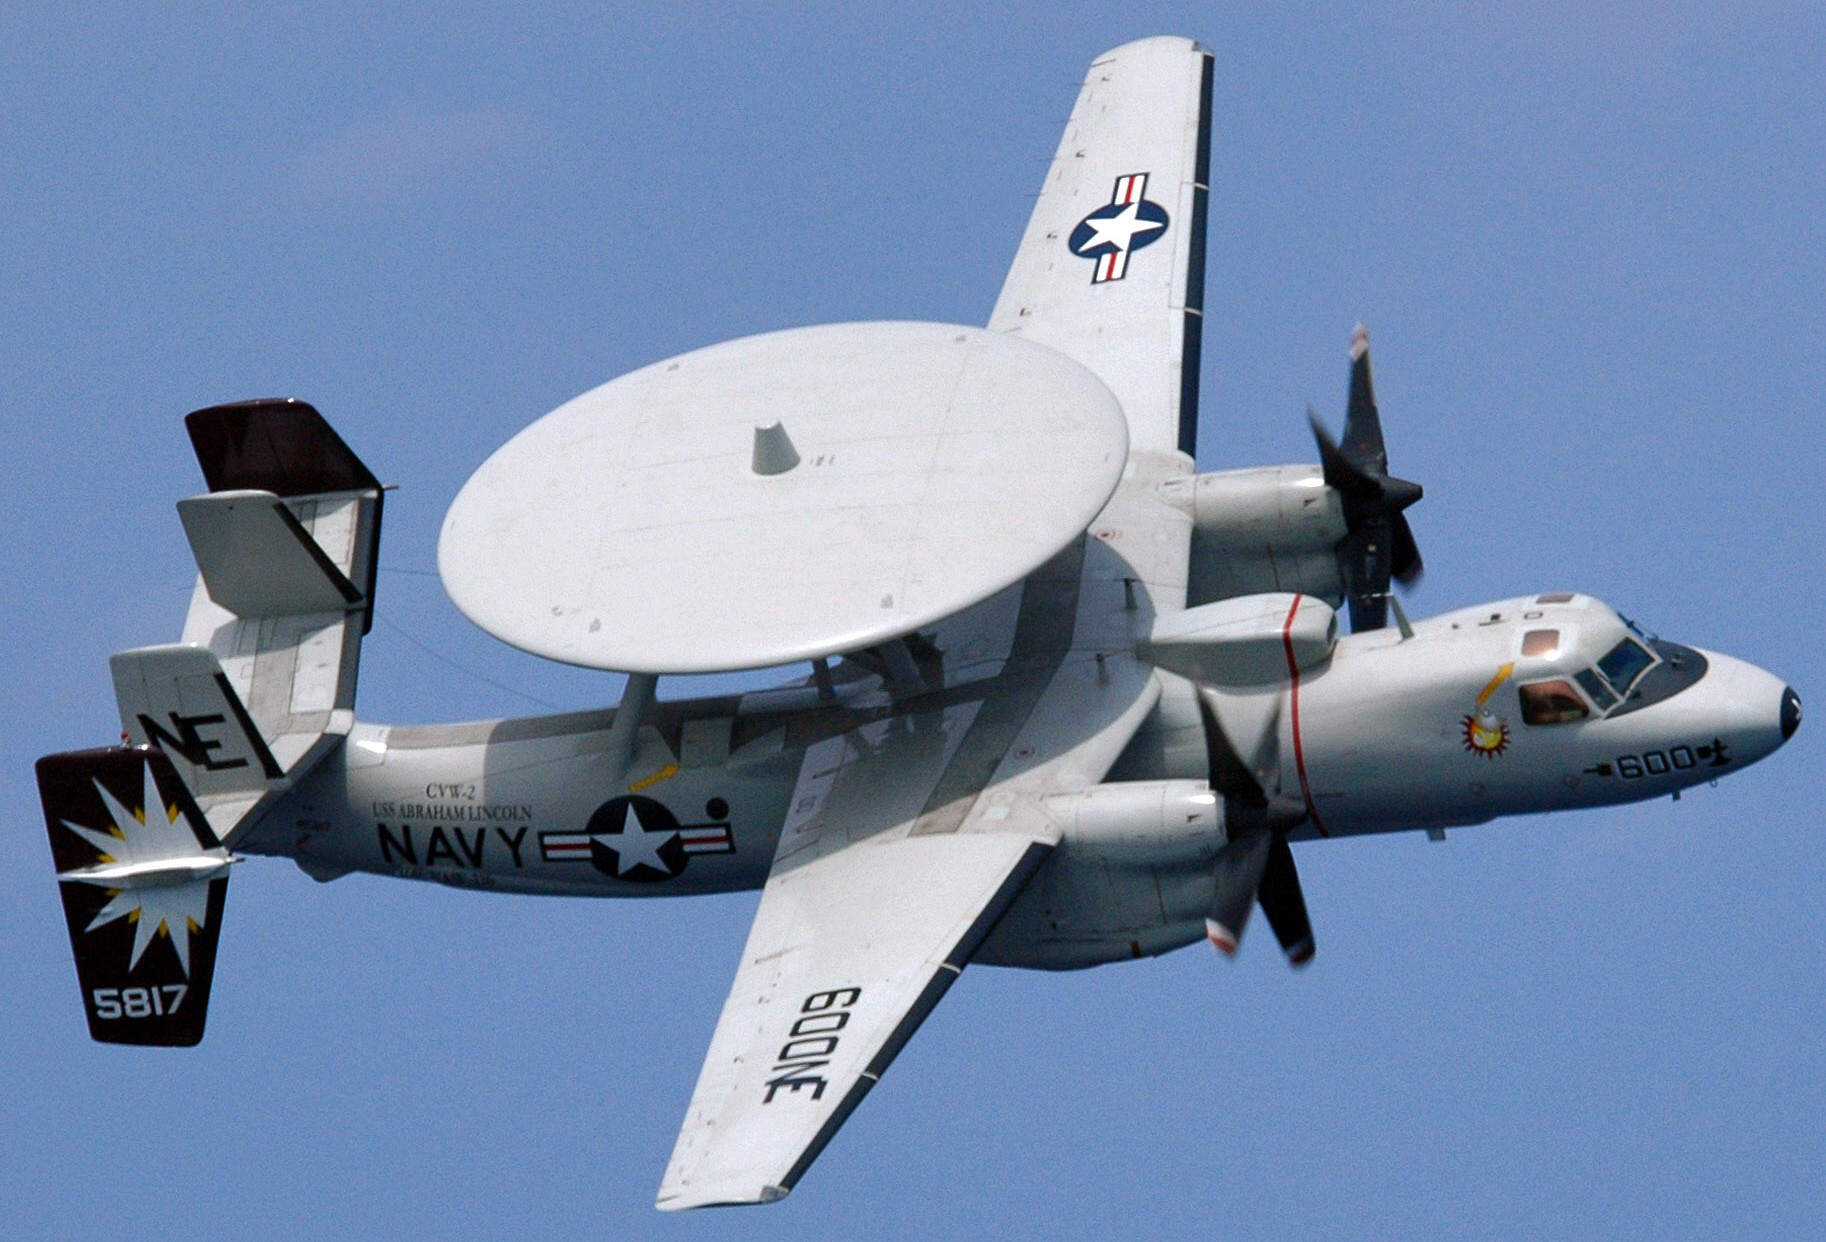 vaw-116 sun kings airborne command control squadron carrier early warning cvw-2 uss abraham lincoln cvn-72 12